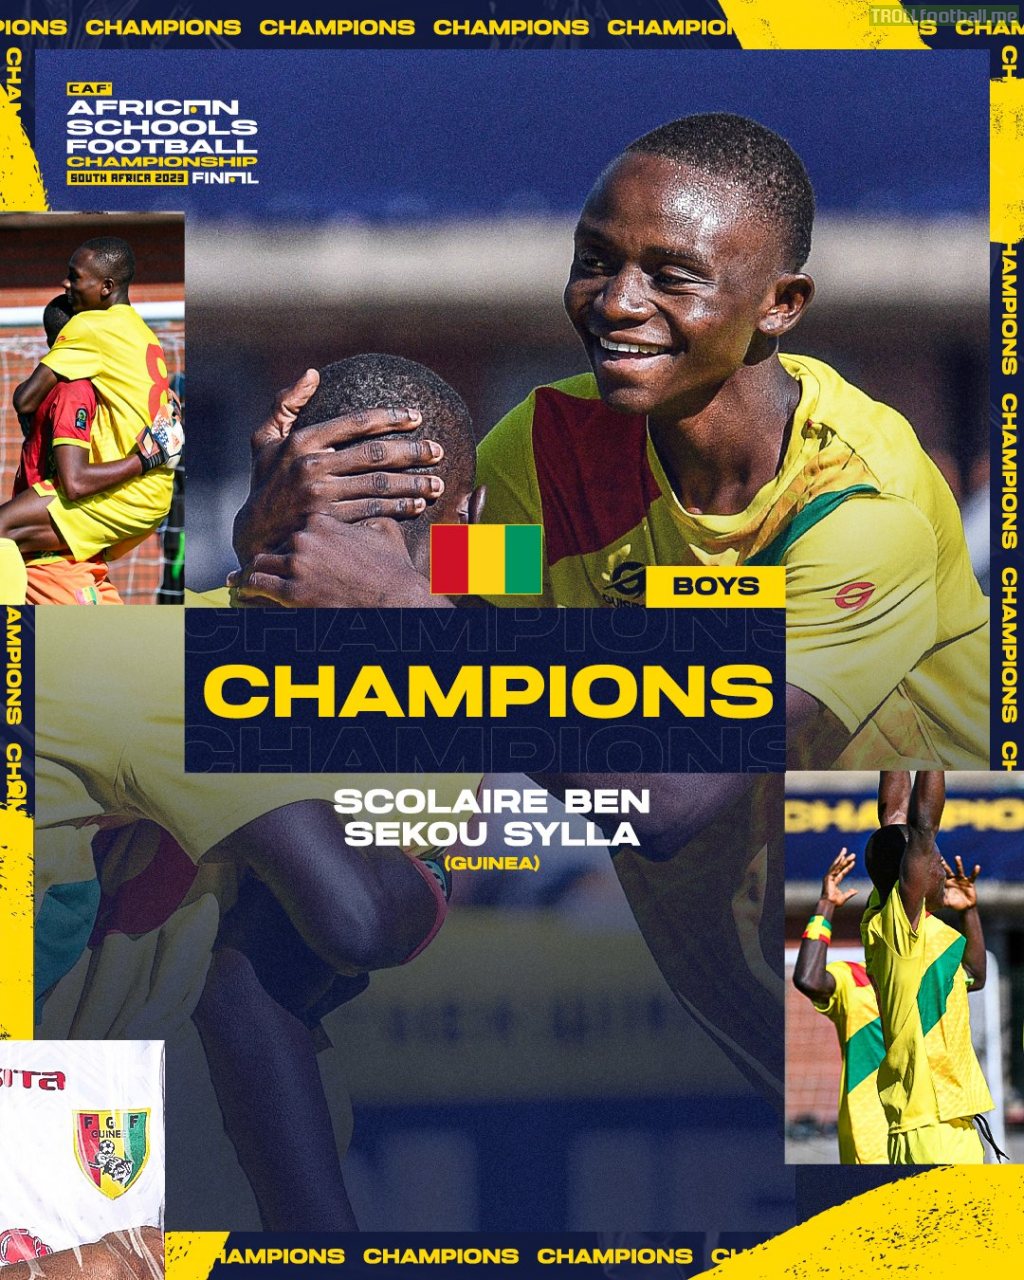 Scolaire Ben Sekou Sylla [Guinea] claim the inaugural Boys’ African Schools Football Championship title